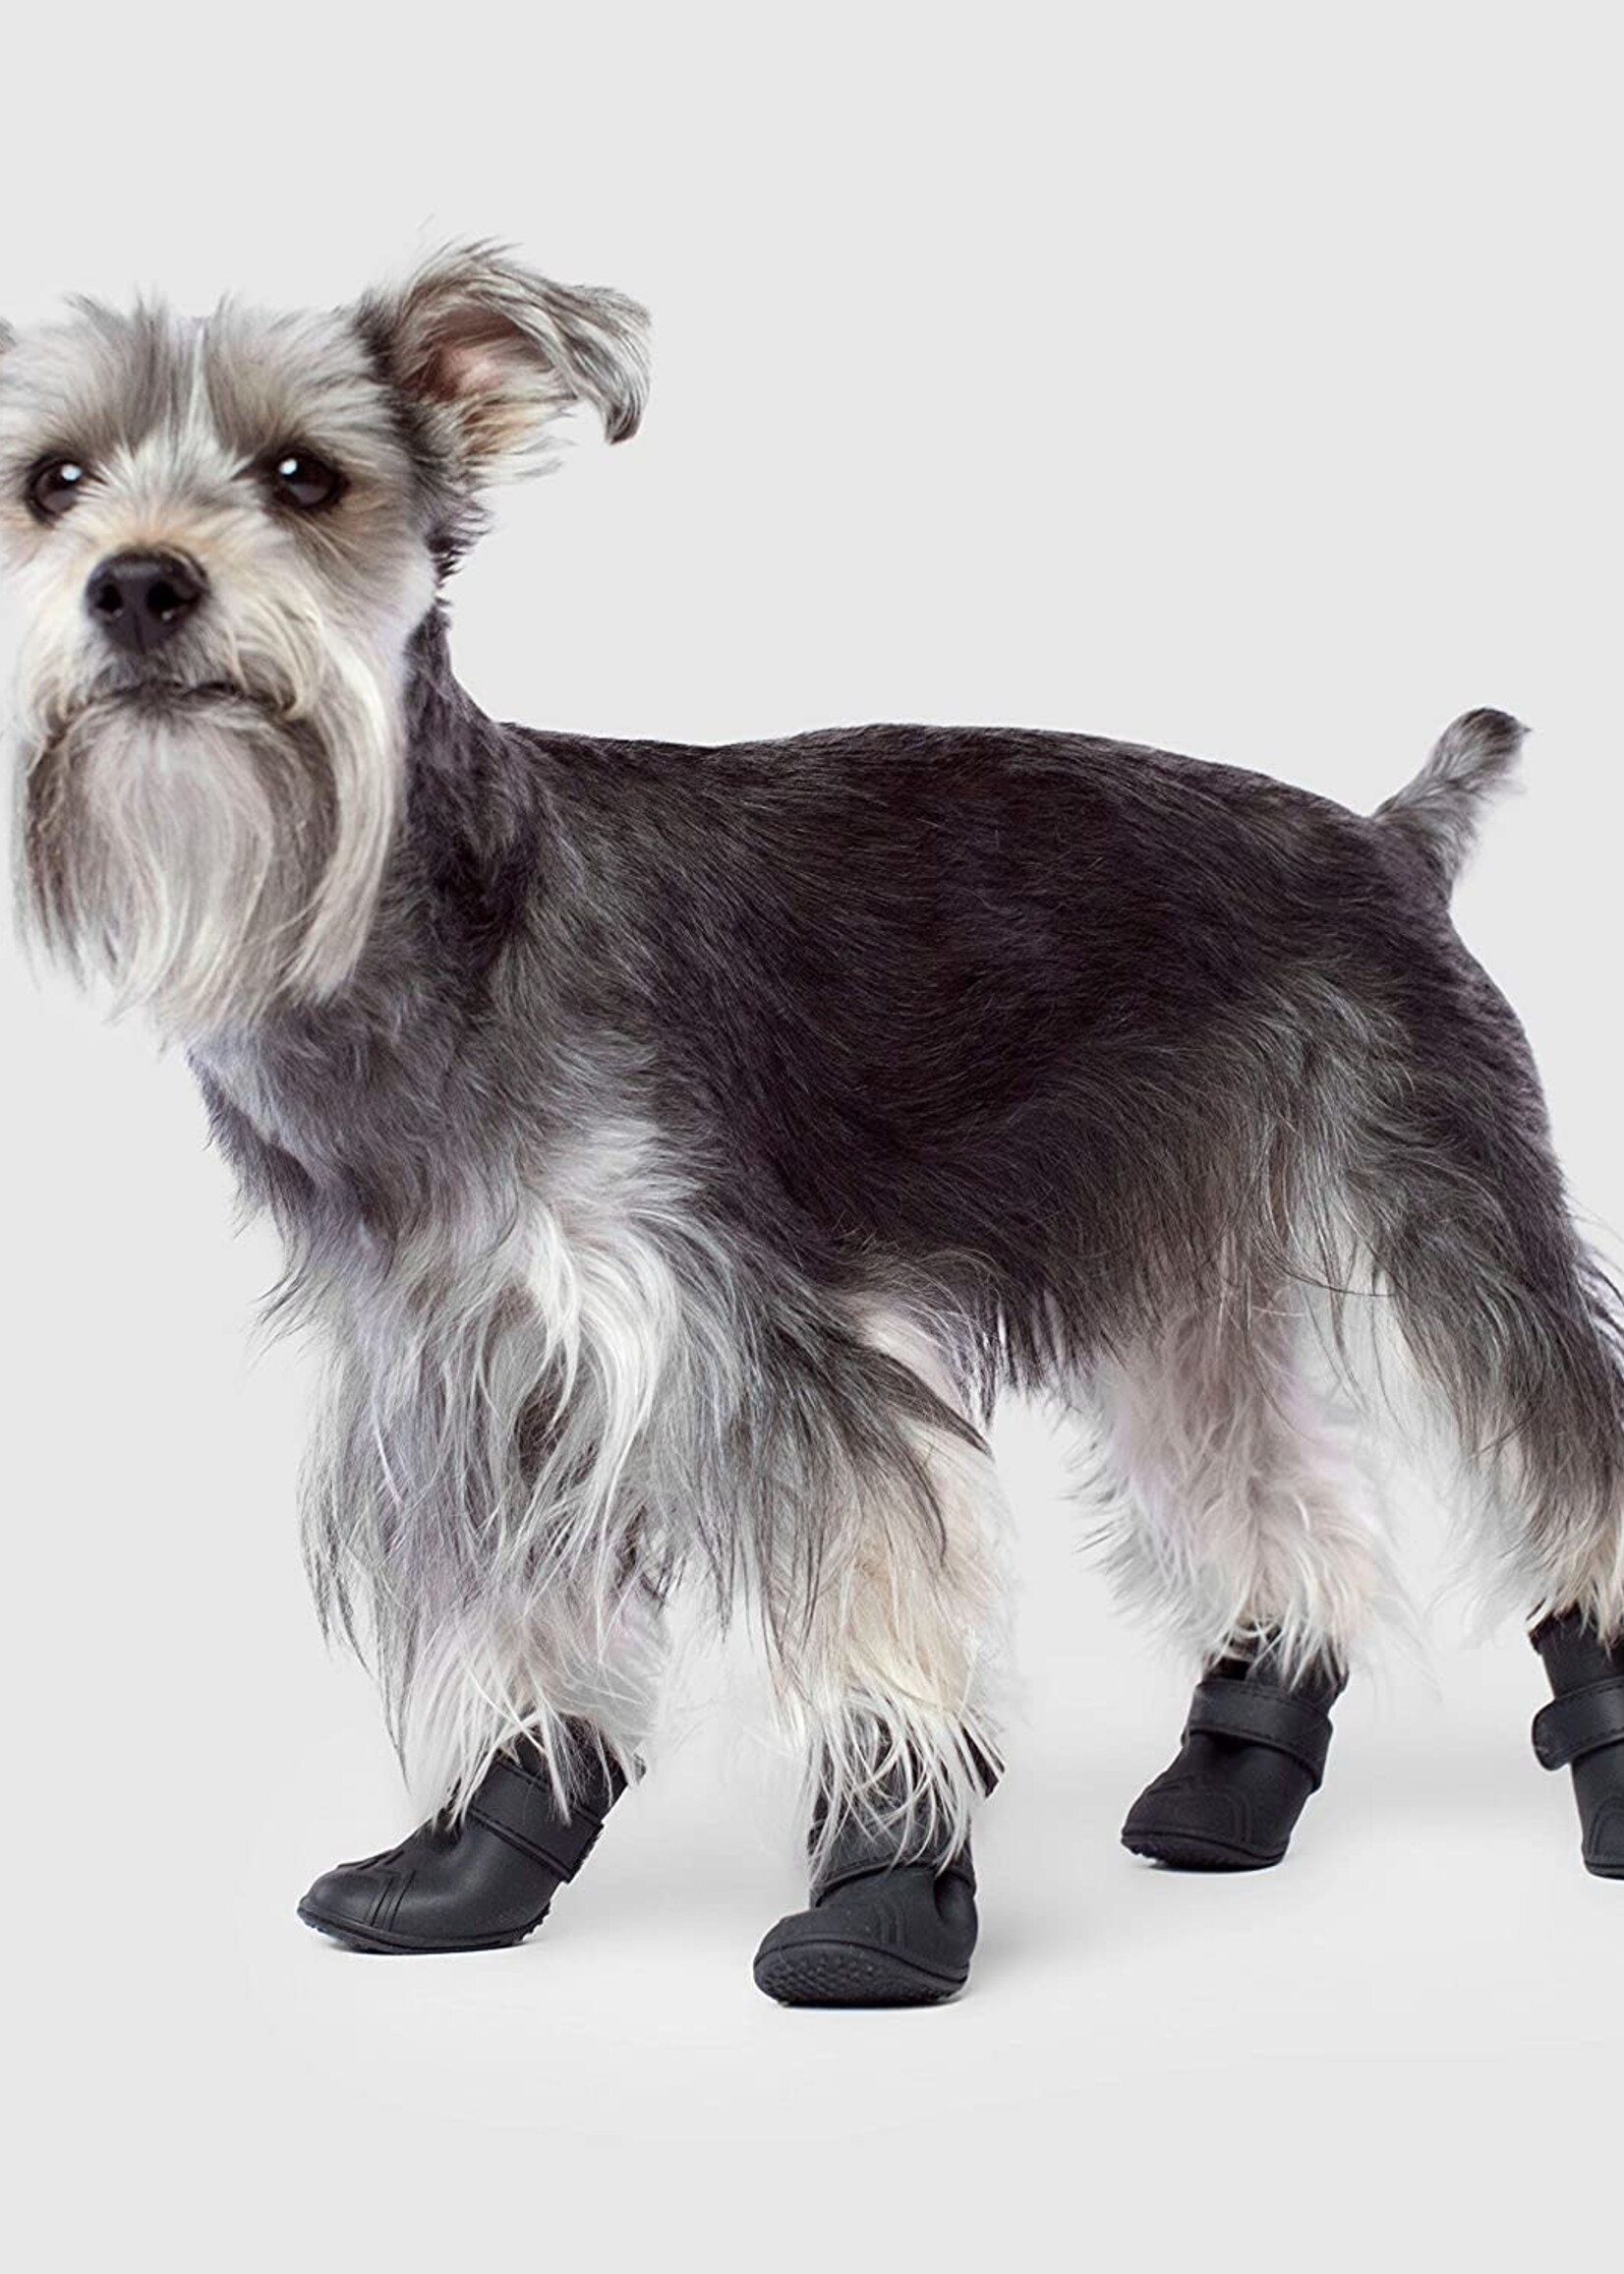 Canada Pooch Canada Pooch Lined Wellies Waterproof Dog Boots